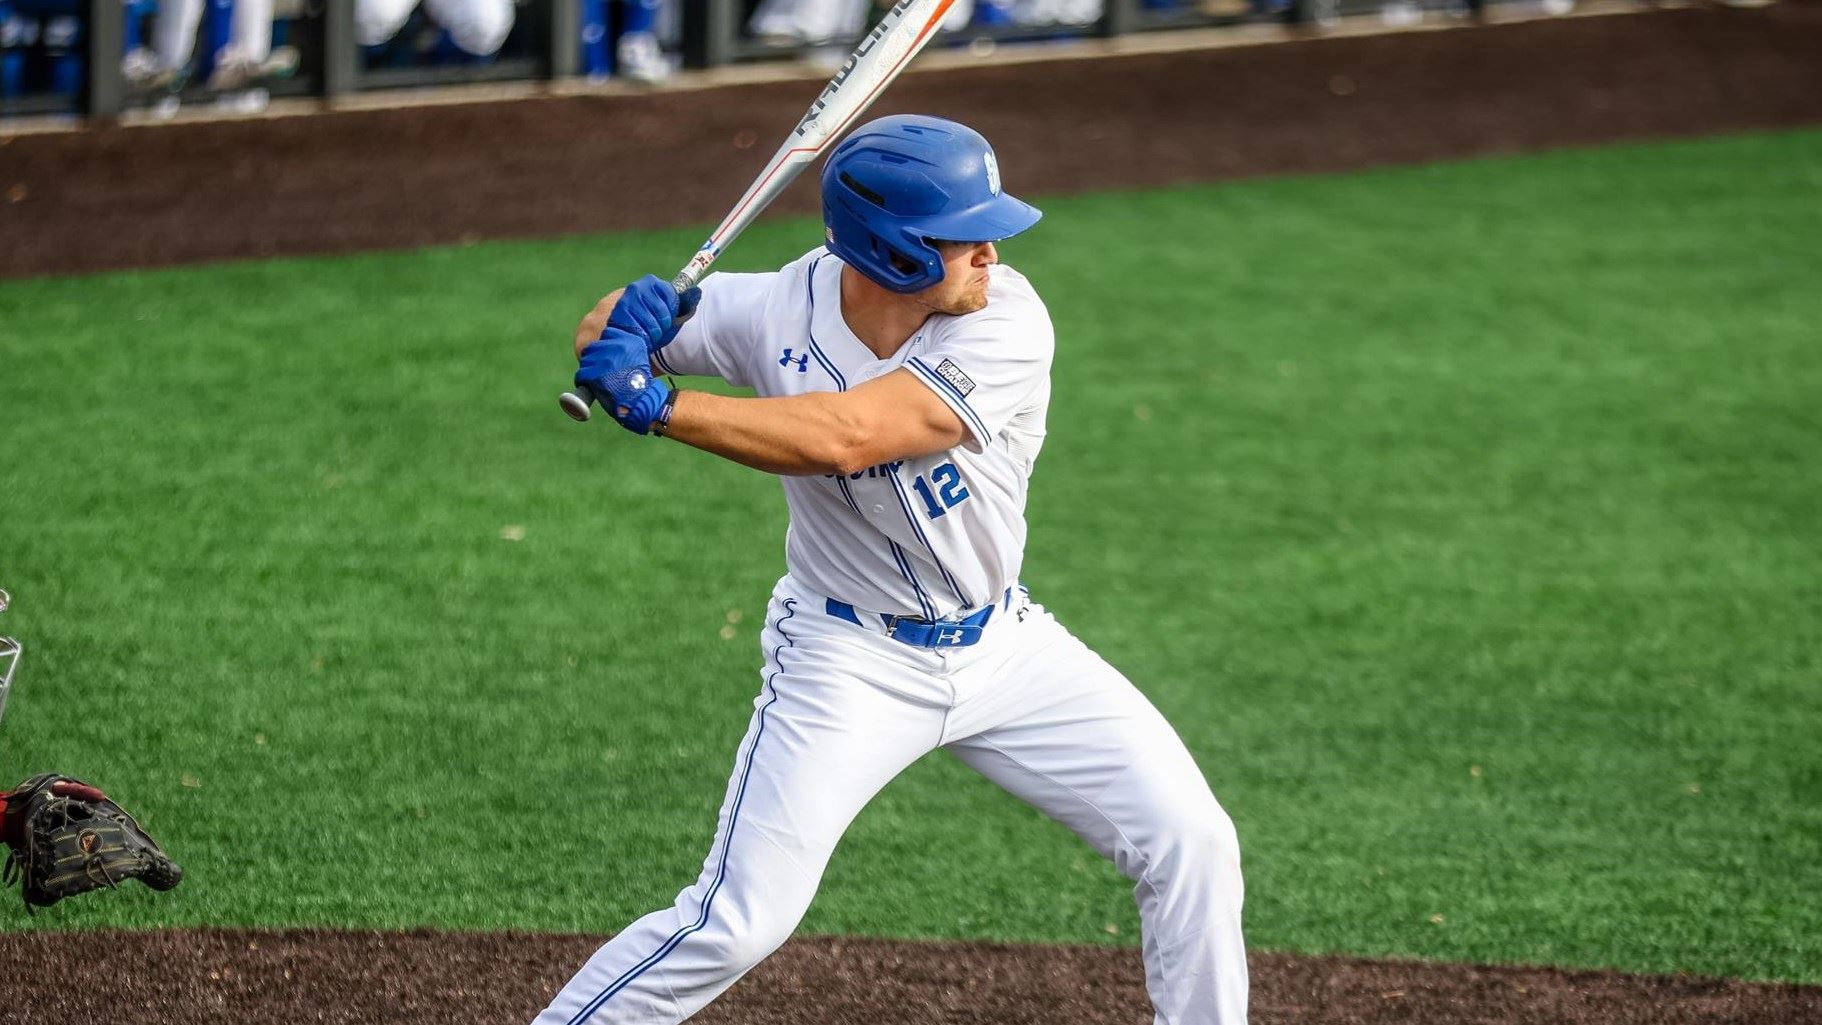 A Seton Hall batter stands at the plate during a game.